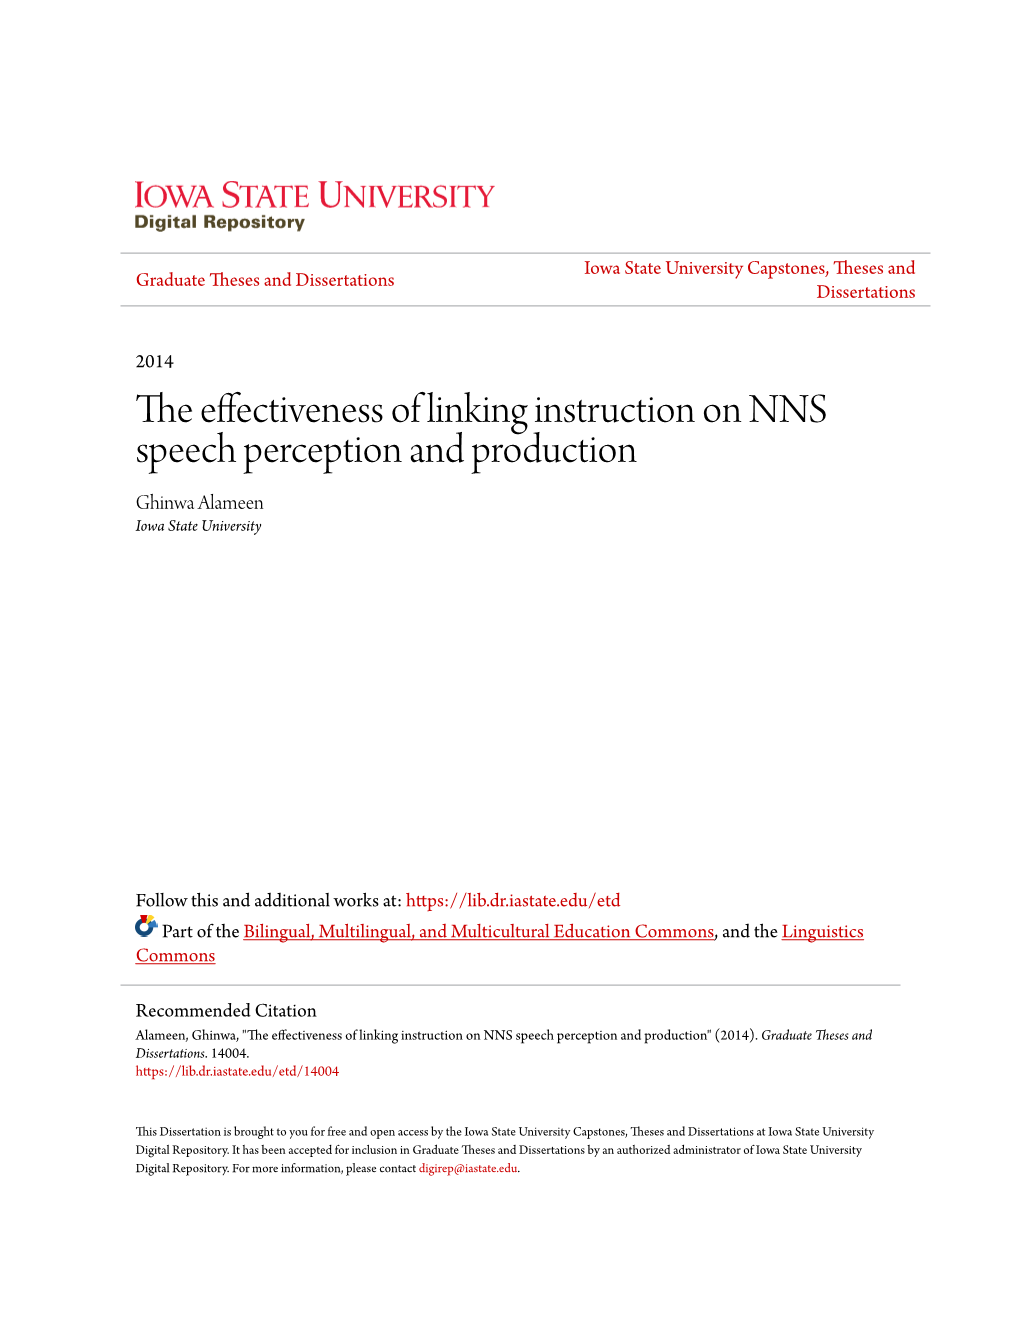 The Effectiveness of Linking Instruction on NNS Speech Perception and Production Ghinwa Alameen Iowa State University